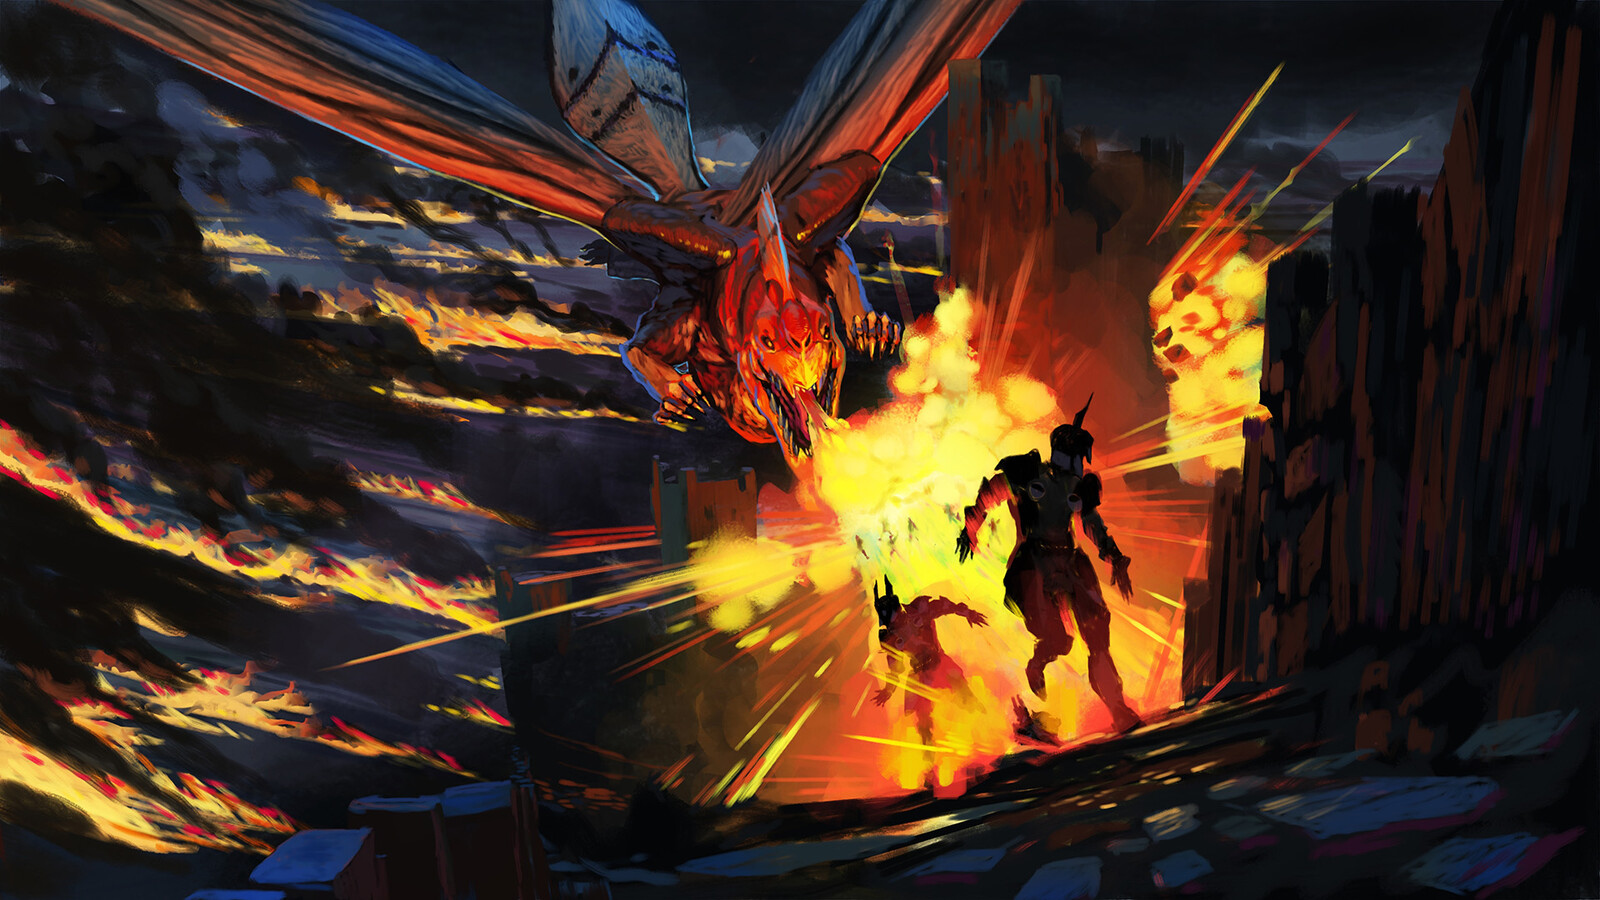 Keyframe 3: Our elf has become a dragon that destroys invaders on its own soil.
